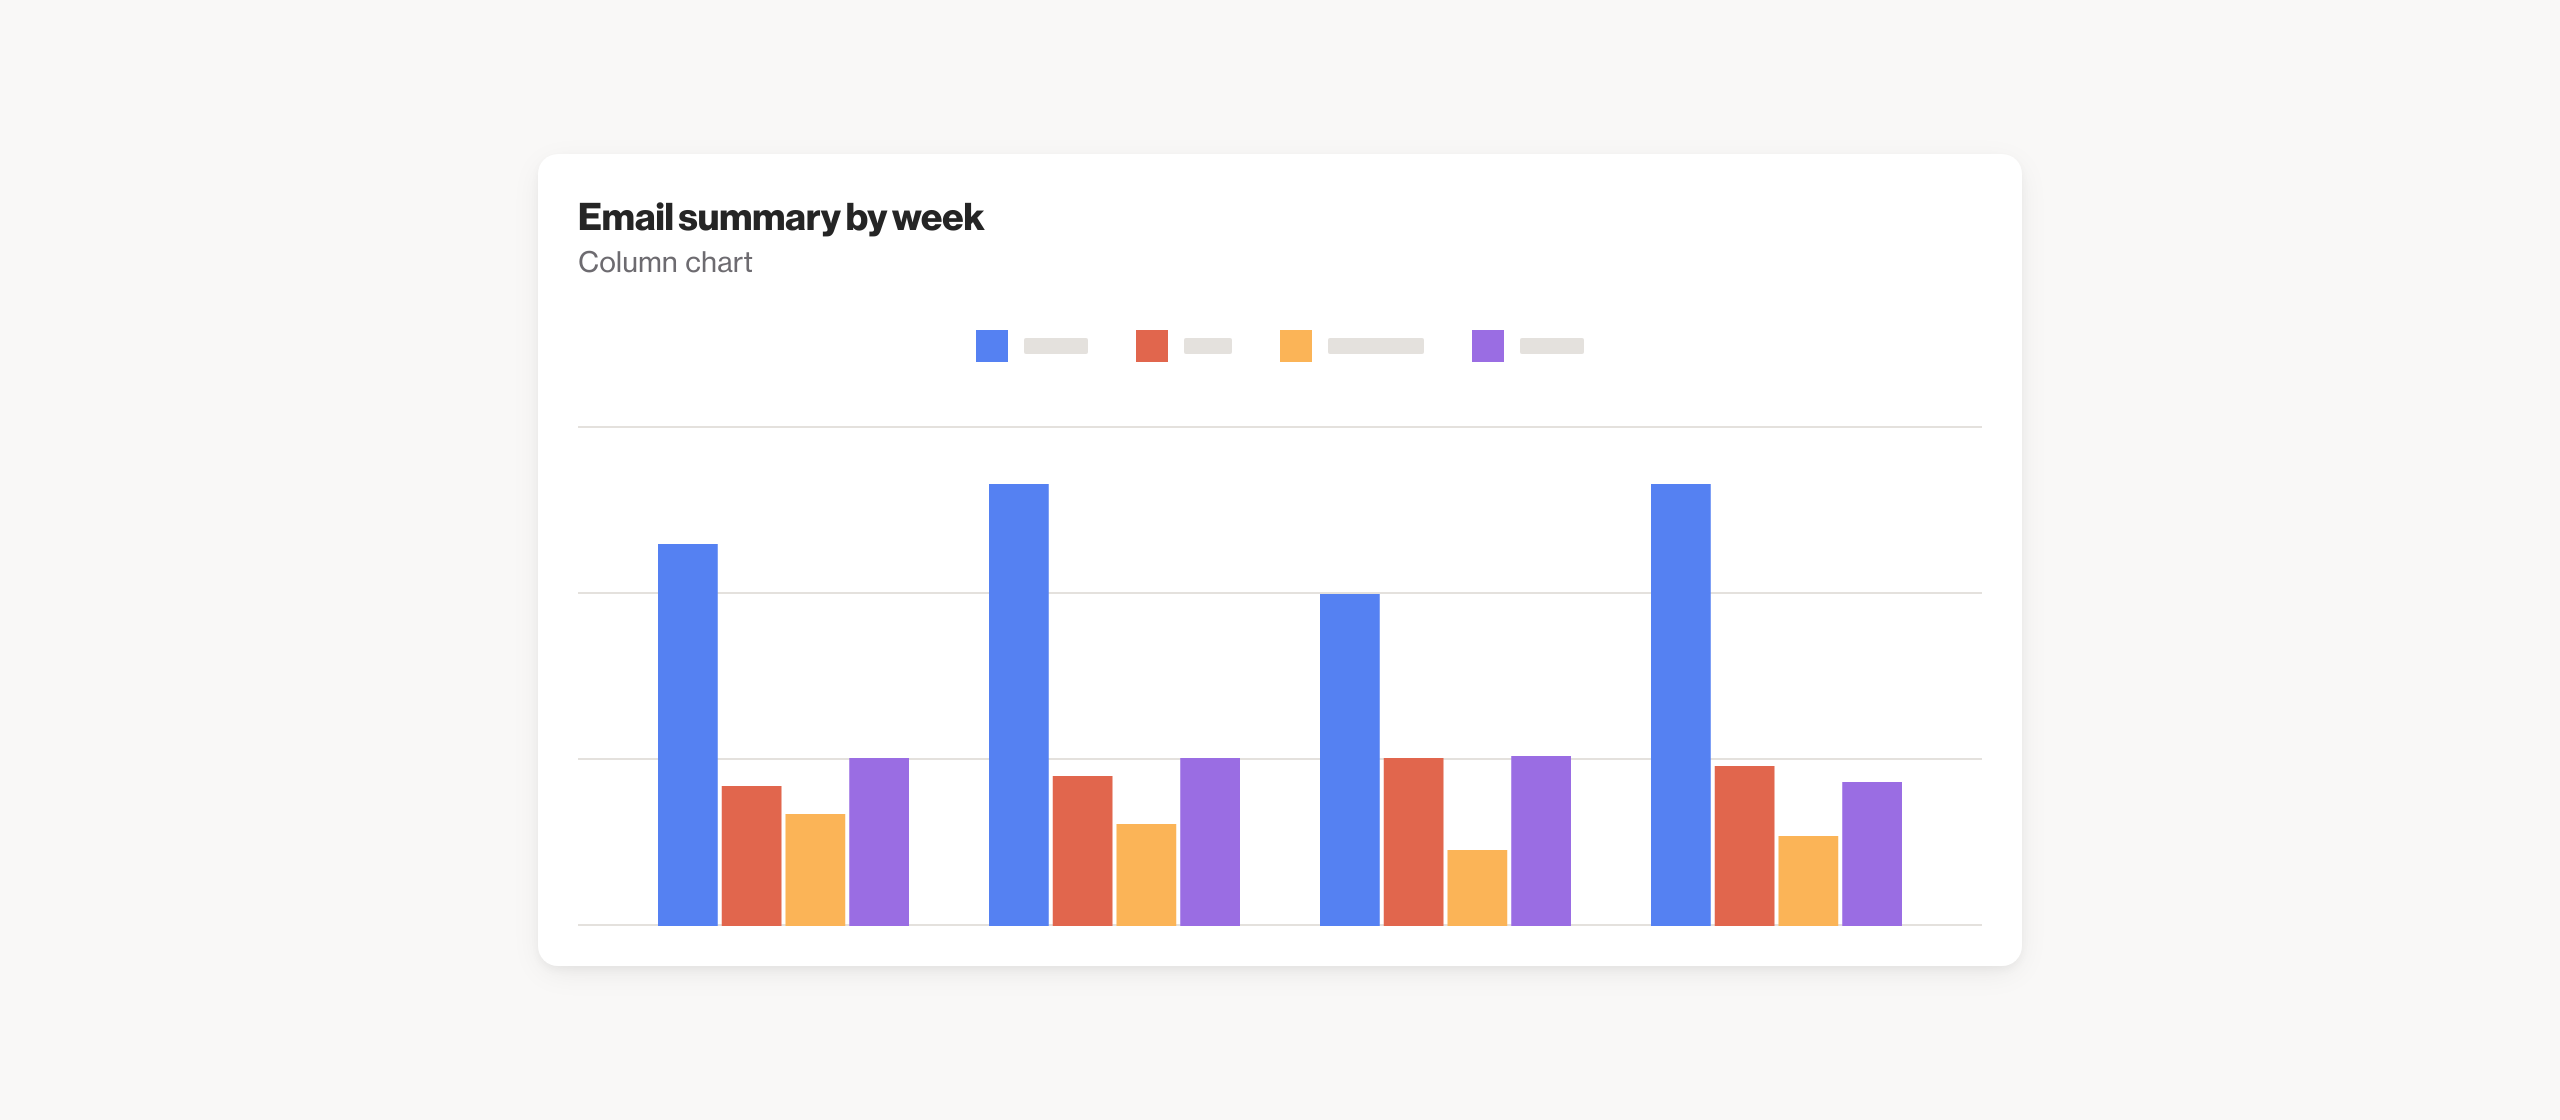 Email summary by week